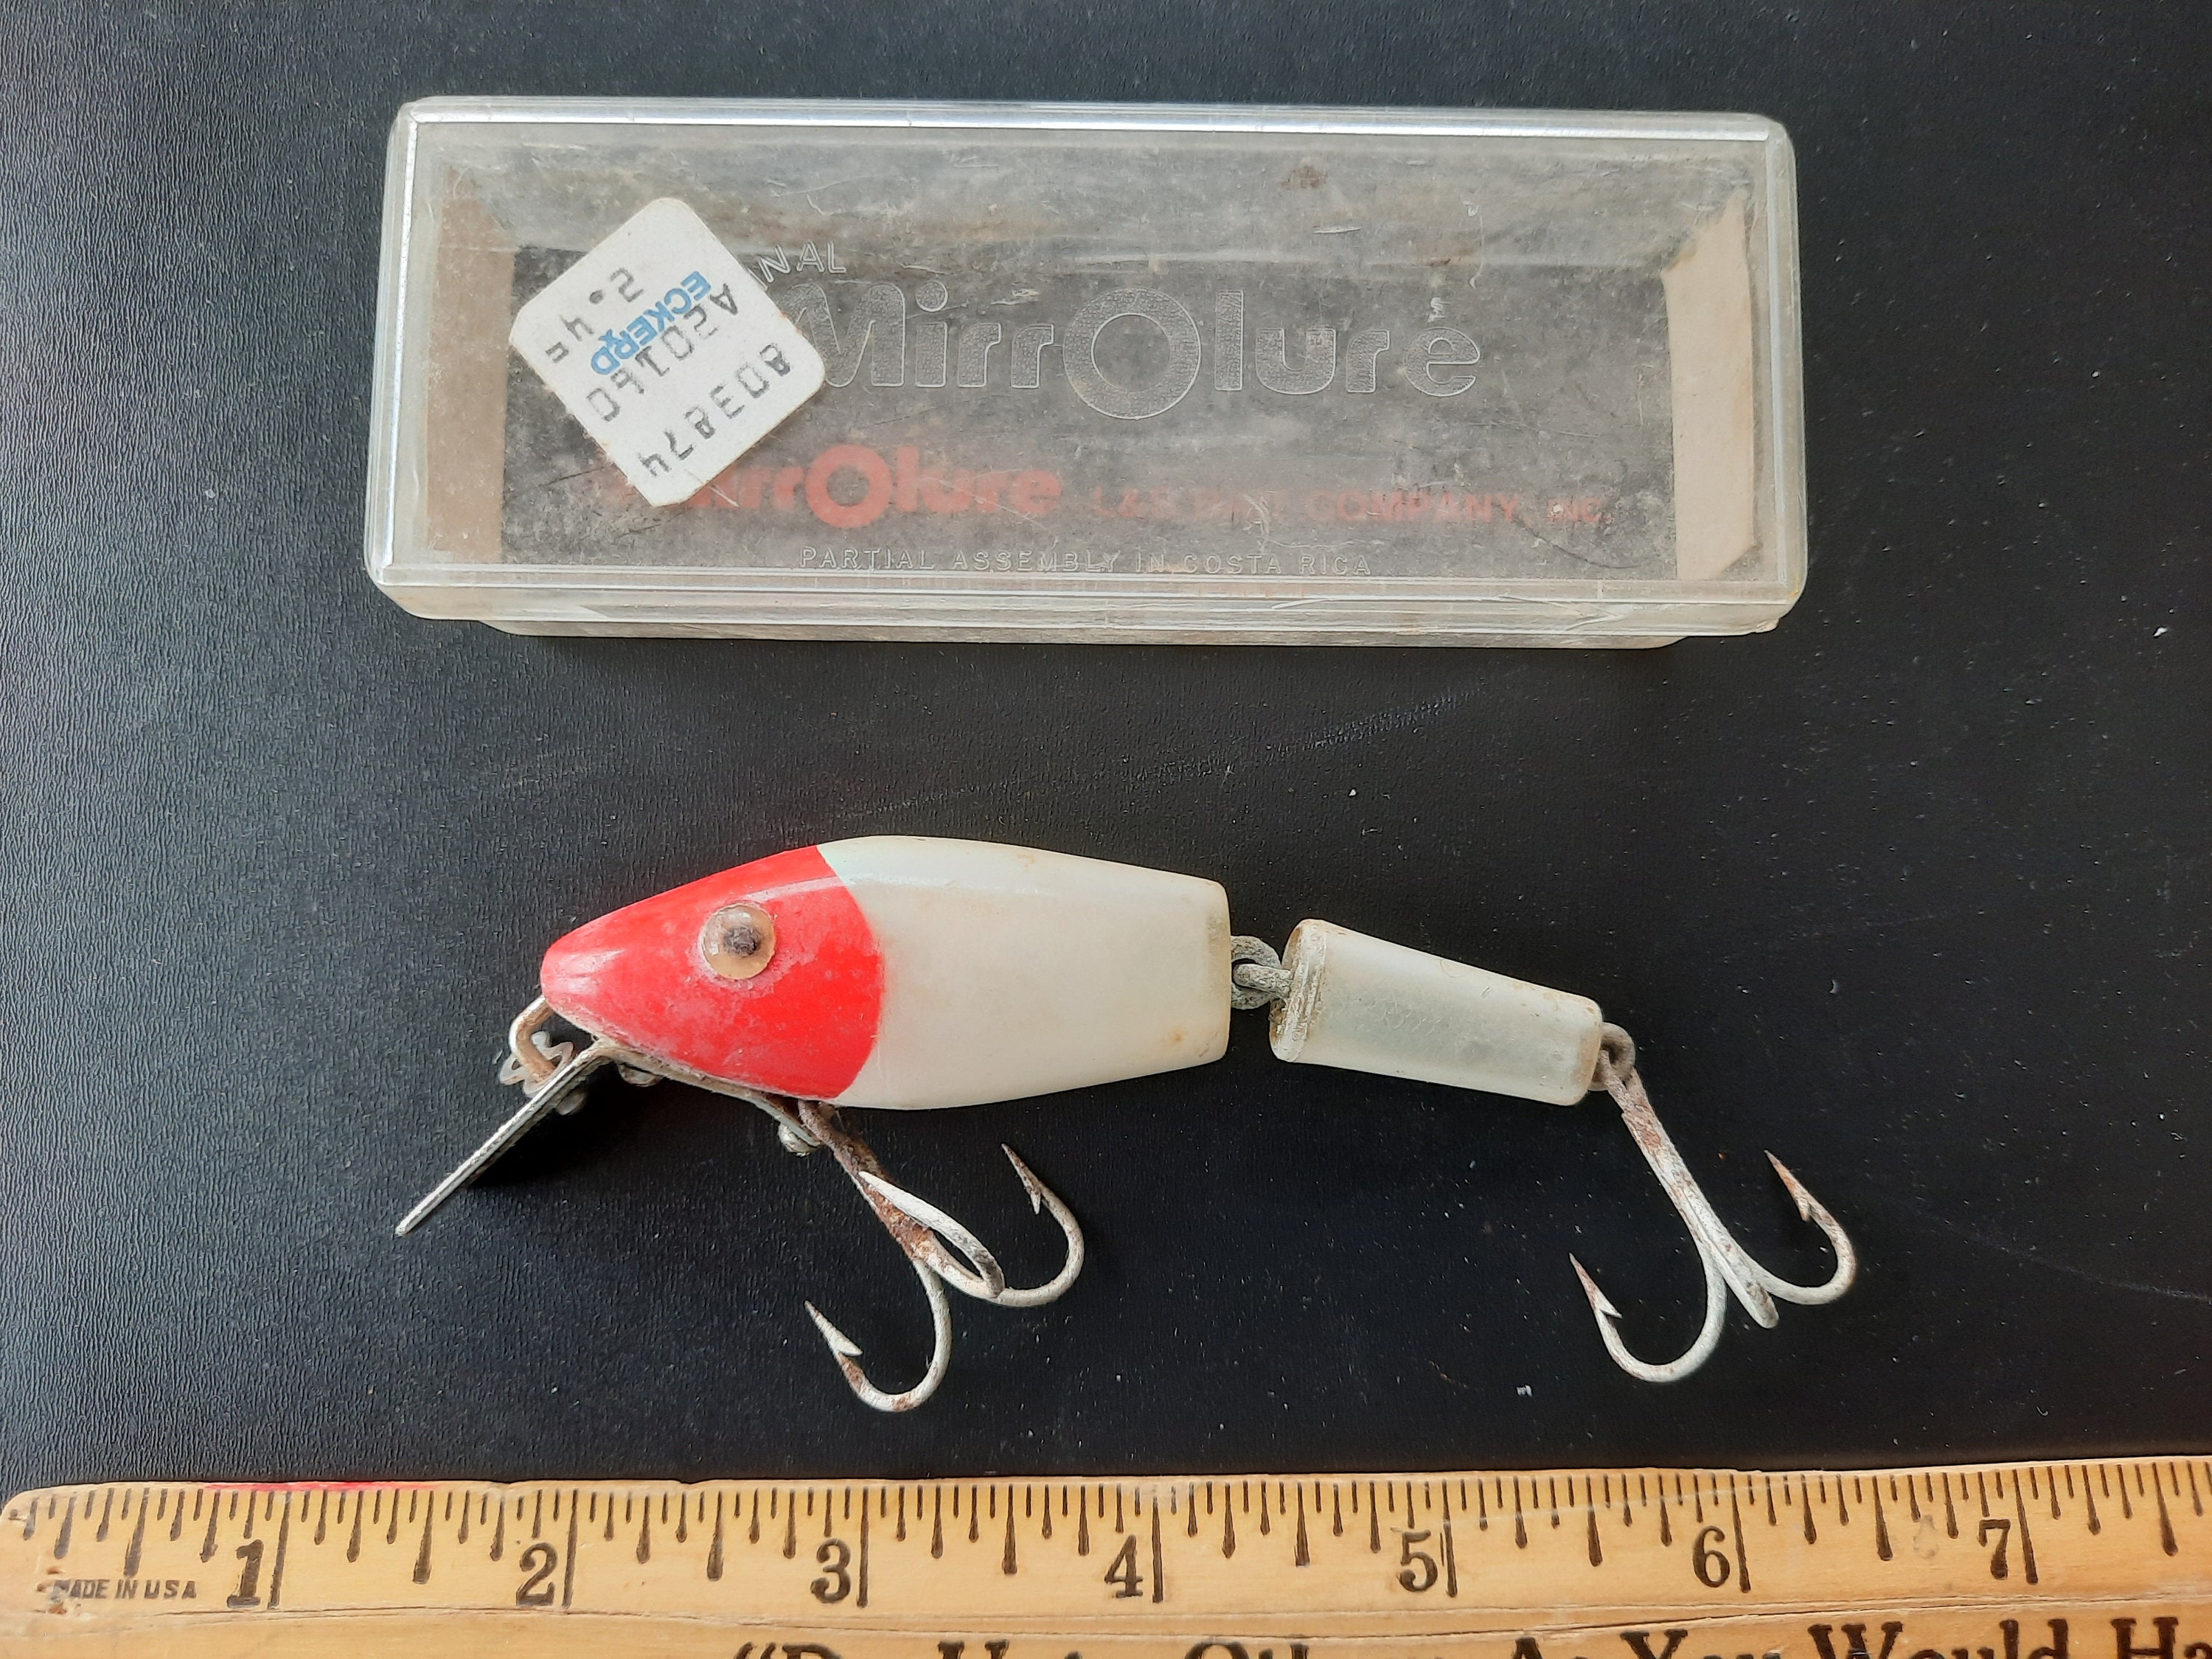 Vintage 1970s Bass Lure: L&S Bait Company Mirrolure, Red/white